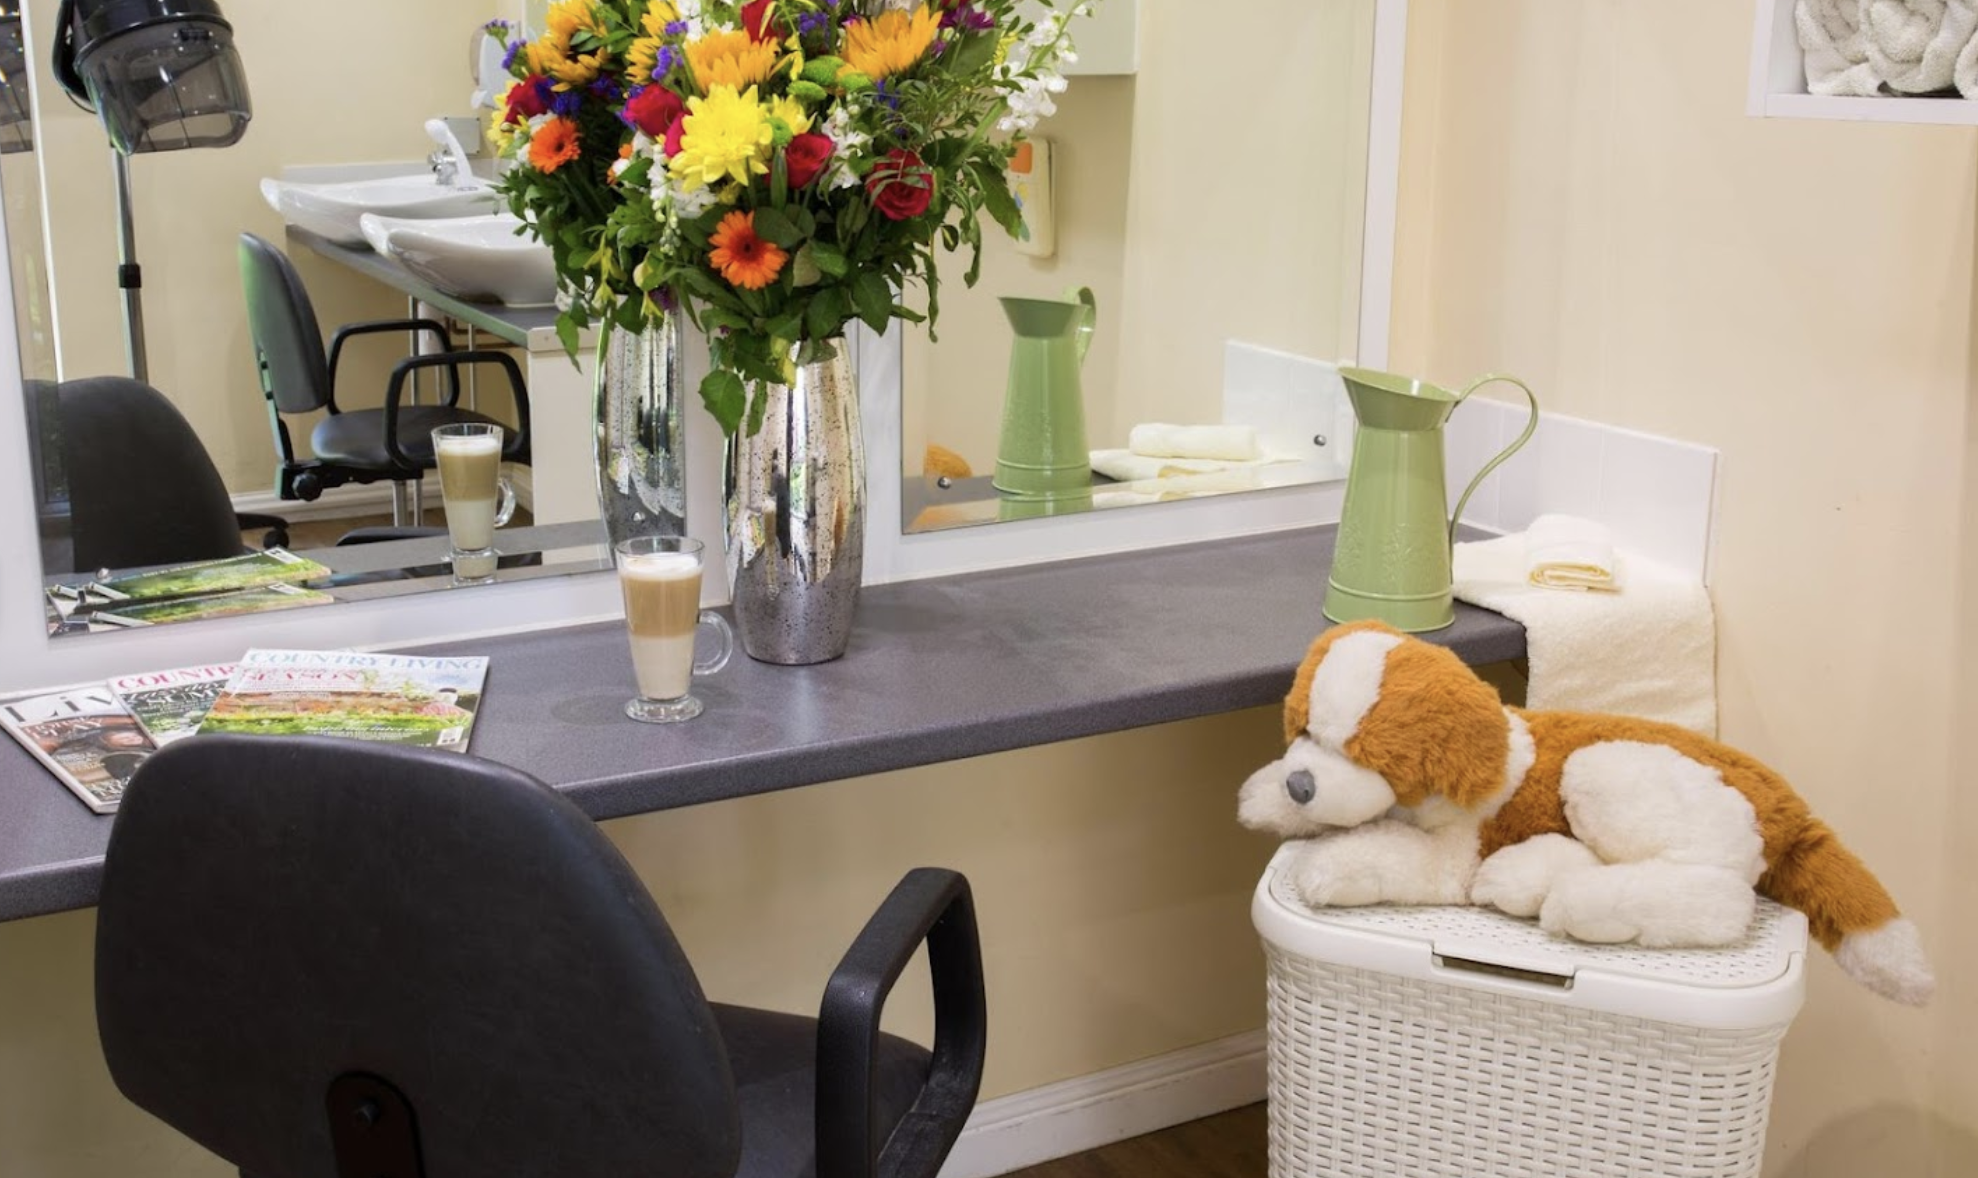 Salon of Northlands House care home in Southampton, Hampshire